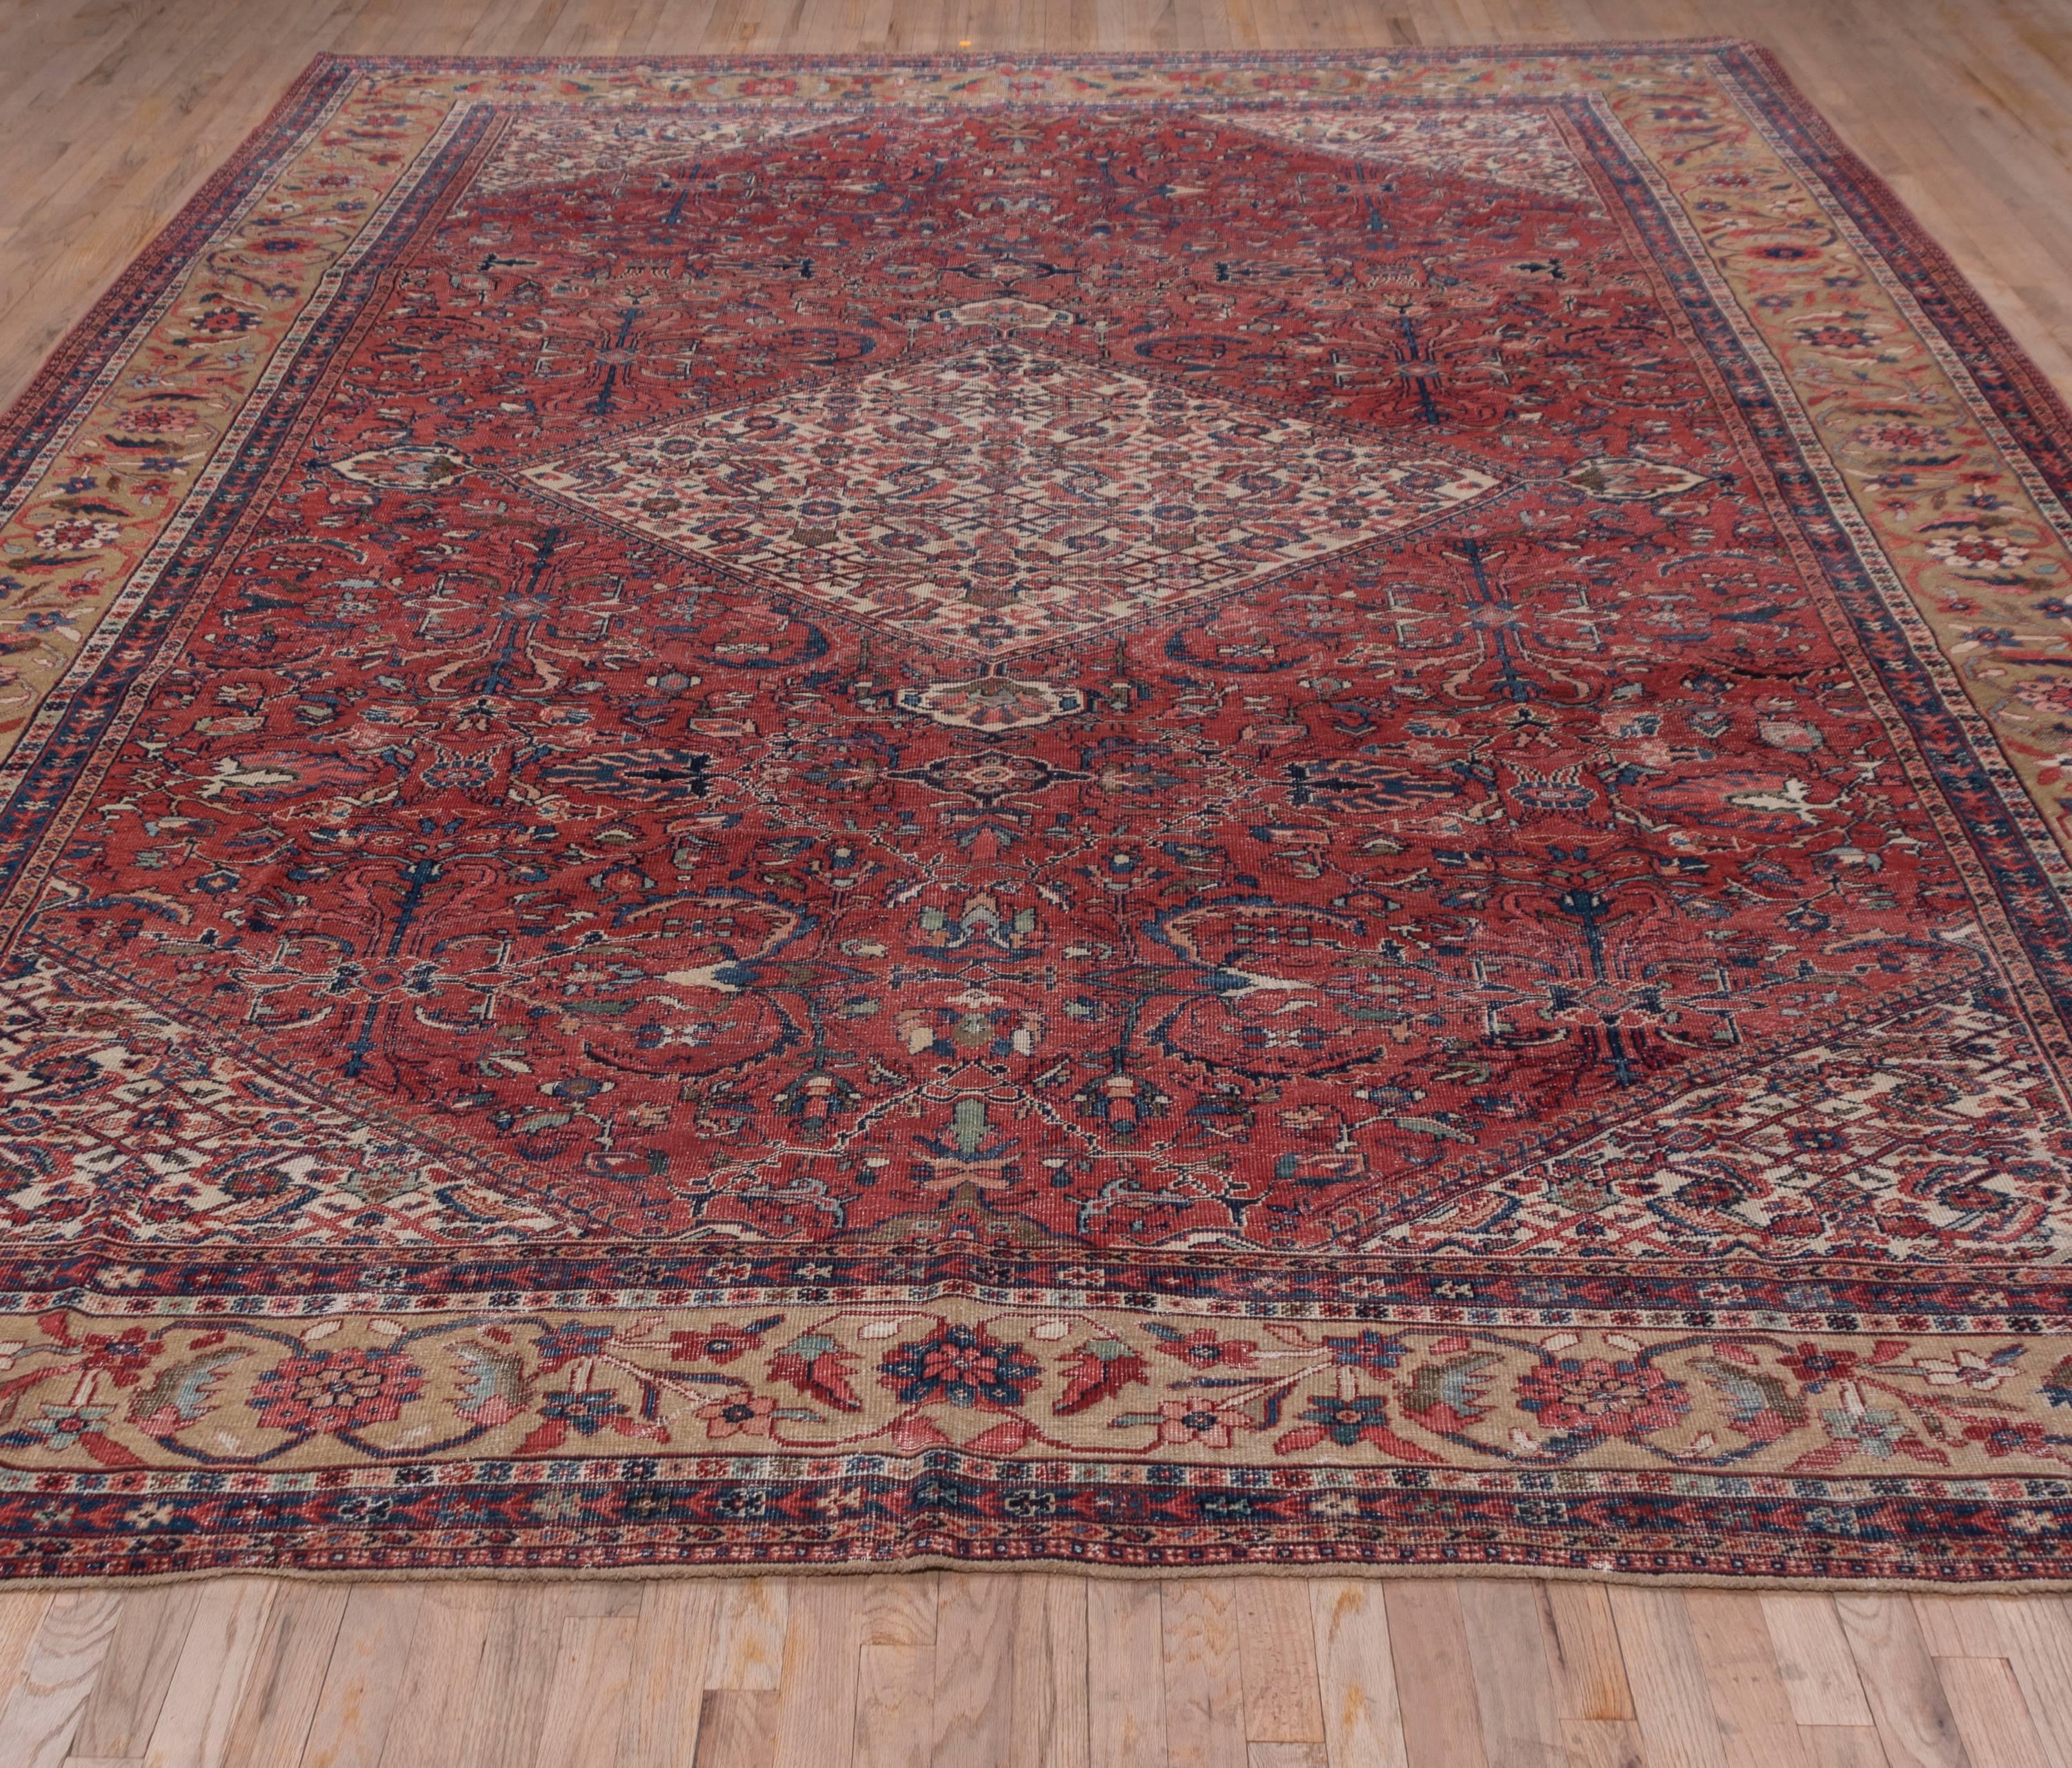 This west Persian rustic carpet shows an ivory Herati pattern on the lozenge medallion and en suite corners. The red field pattern is more uncommon with lazy palmetttes and two-tone double acanthus fronds. The camel yellow border displays the